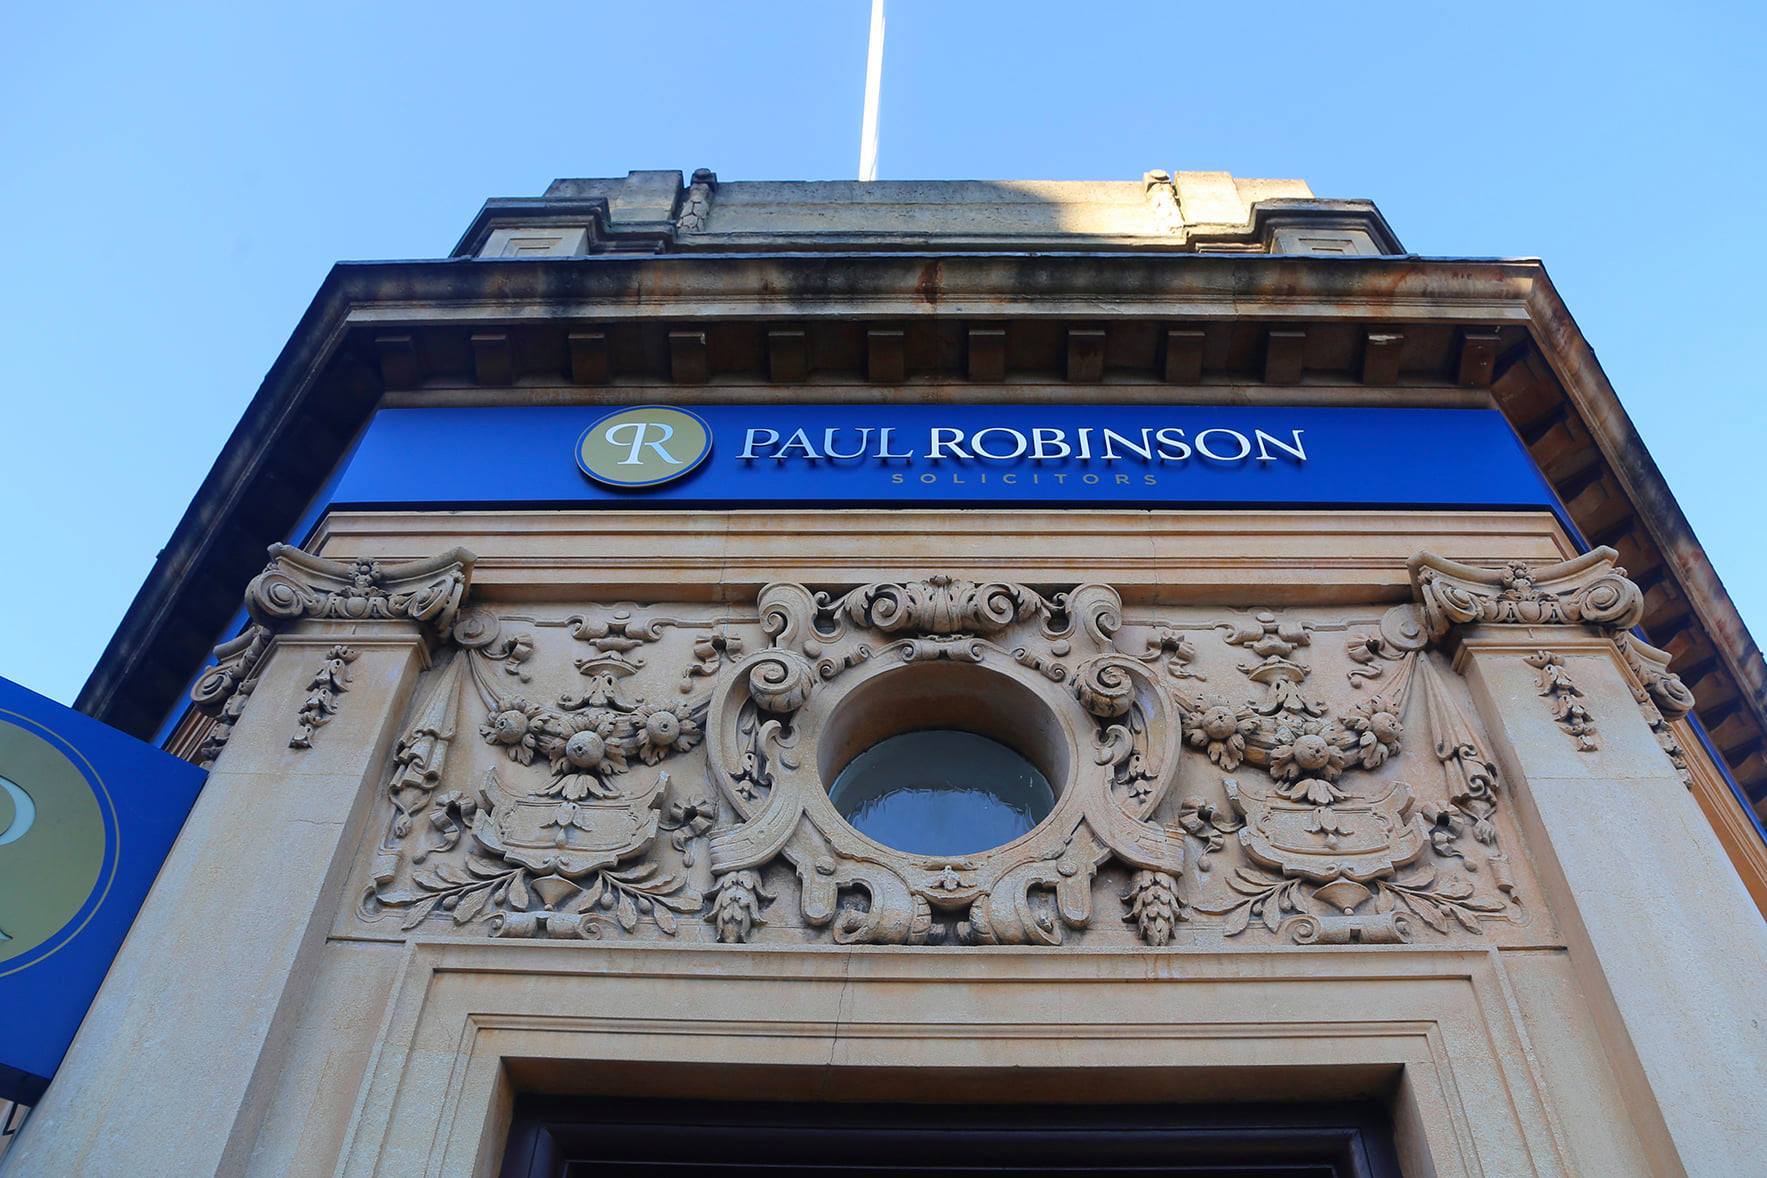 Helping the community - Paul Robinson Solicitors is now found at the site where Lloyds TSB was once housed